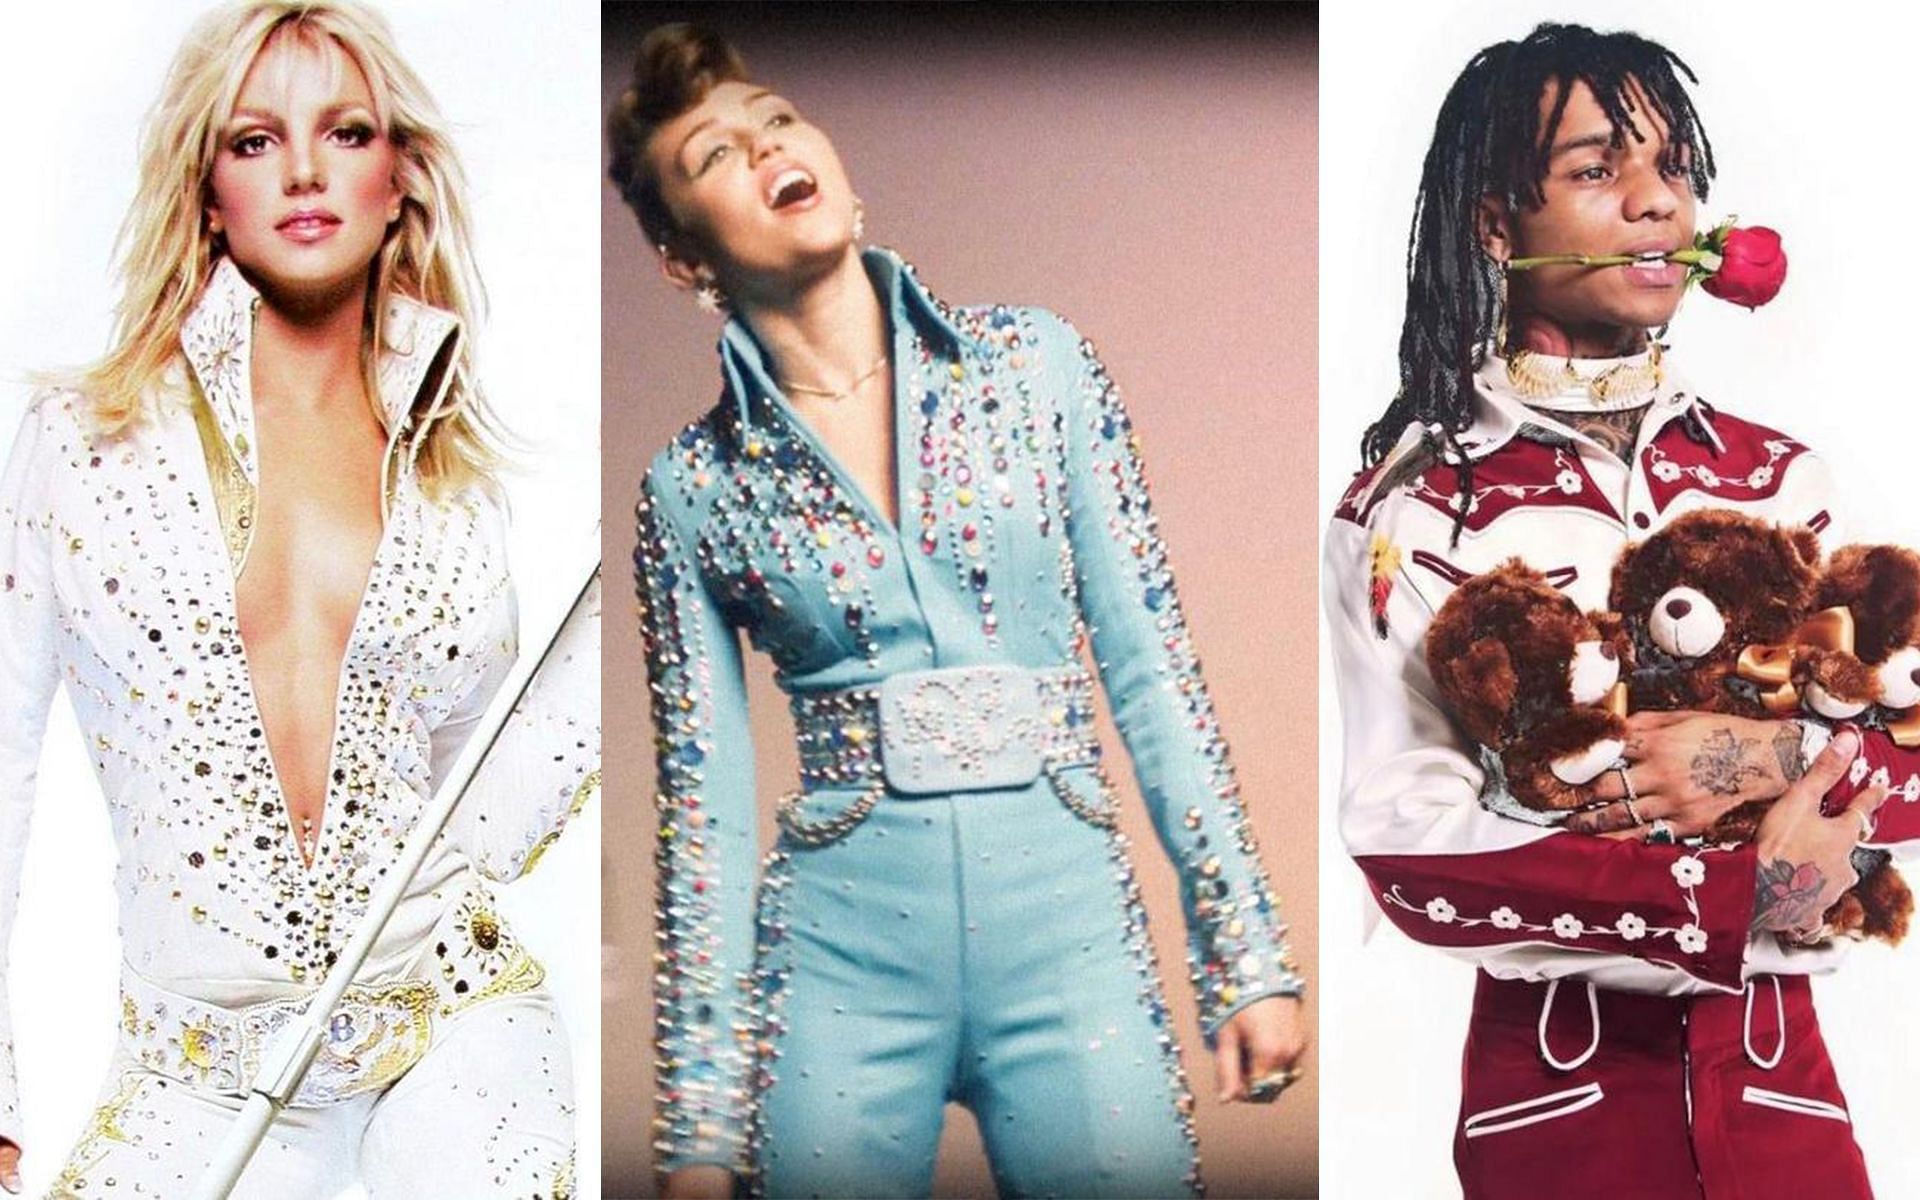 Britney Spears, Miley Cyrus and Swae Lee inspired by the King&#039;s style (Image via @bazluhrmann/Instagram)